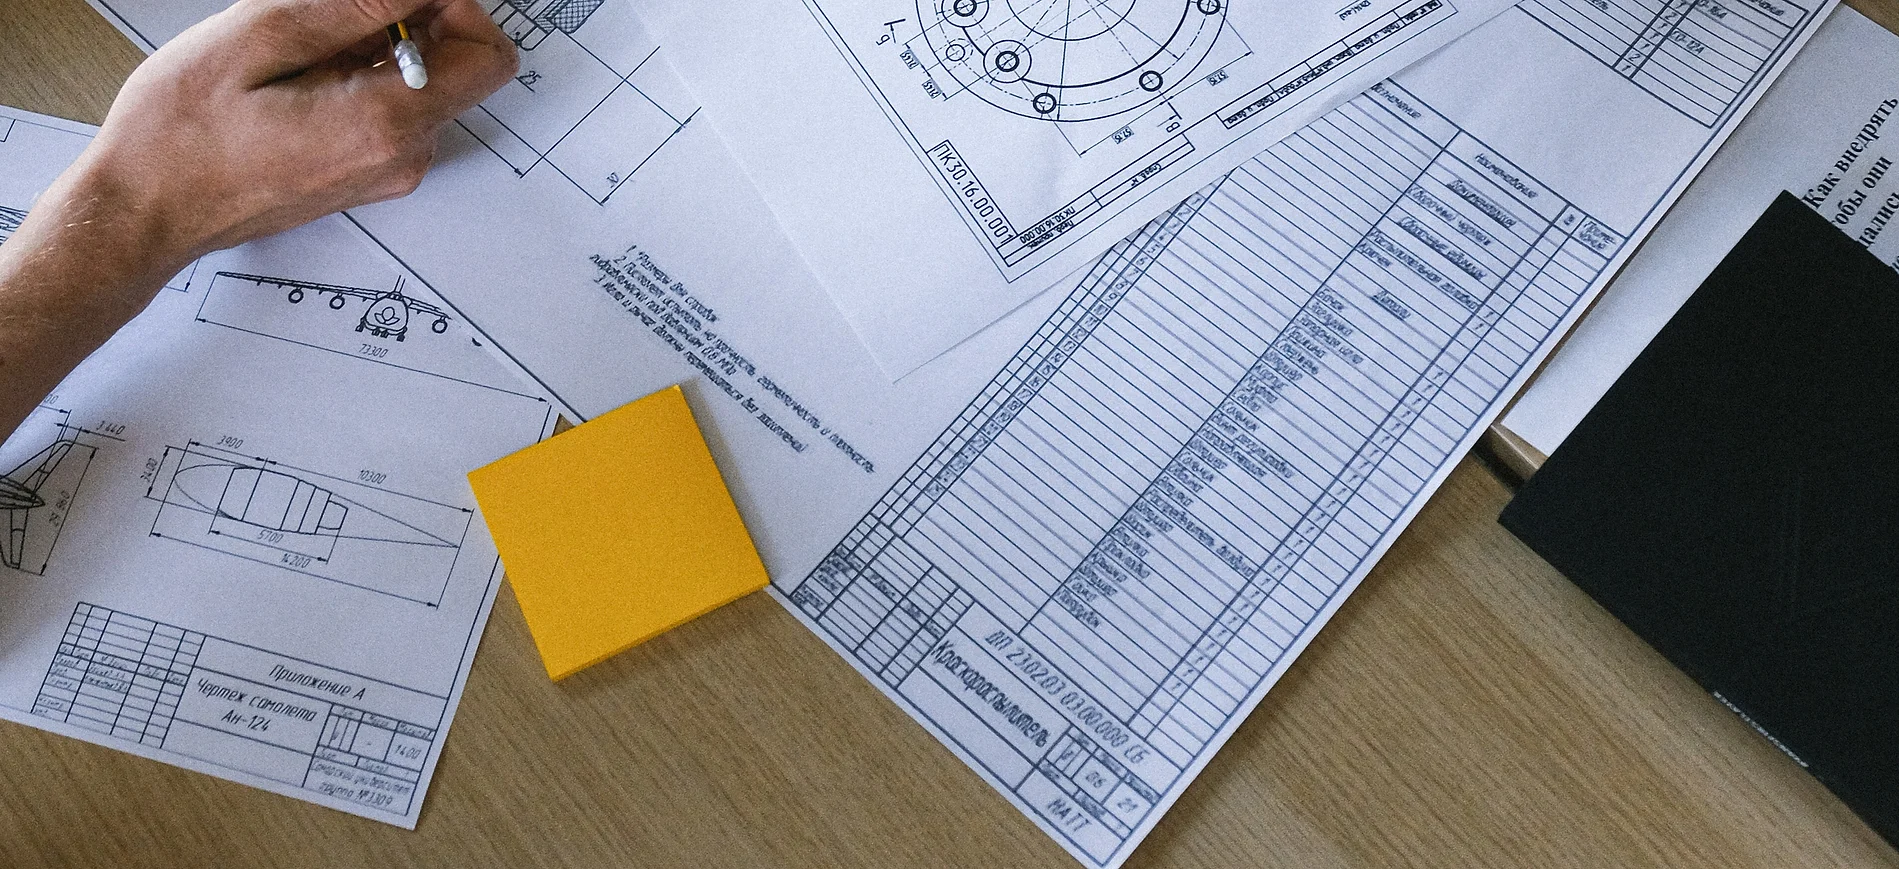 a hand holding a yellow post-it note next to a blueprint